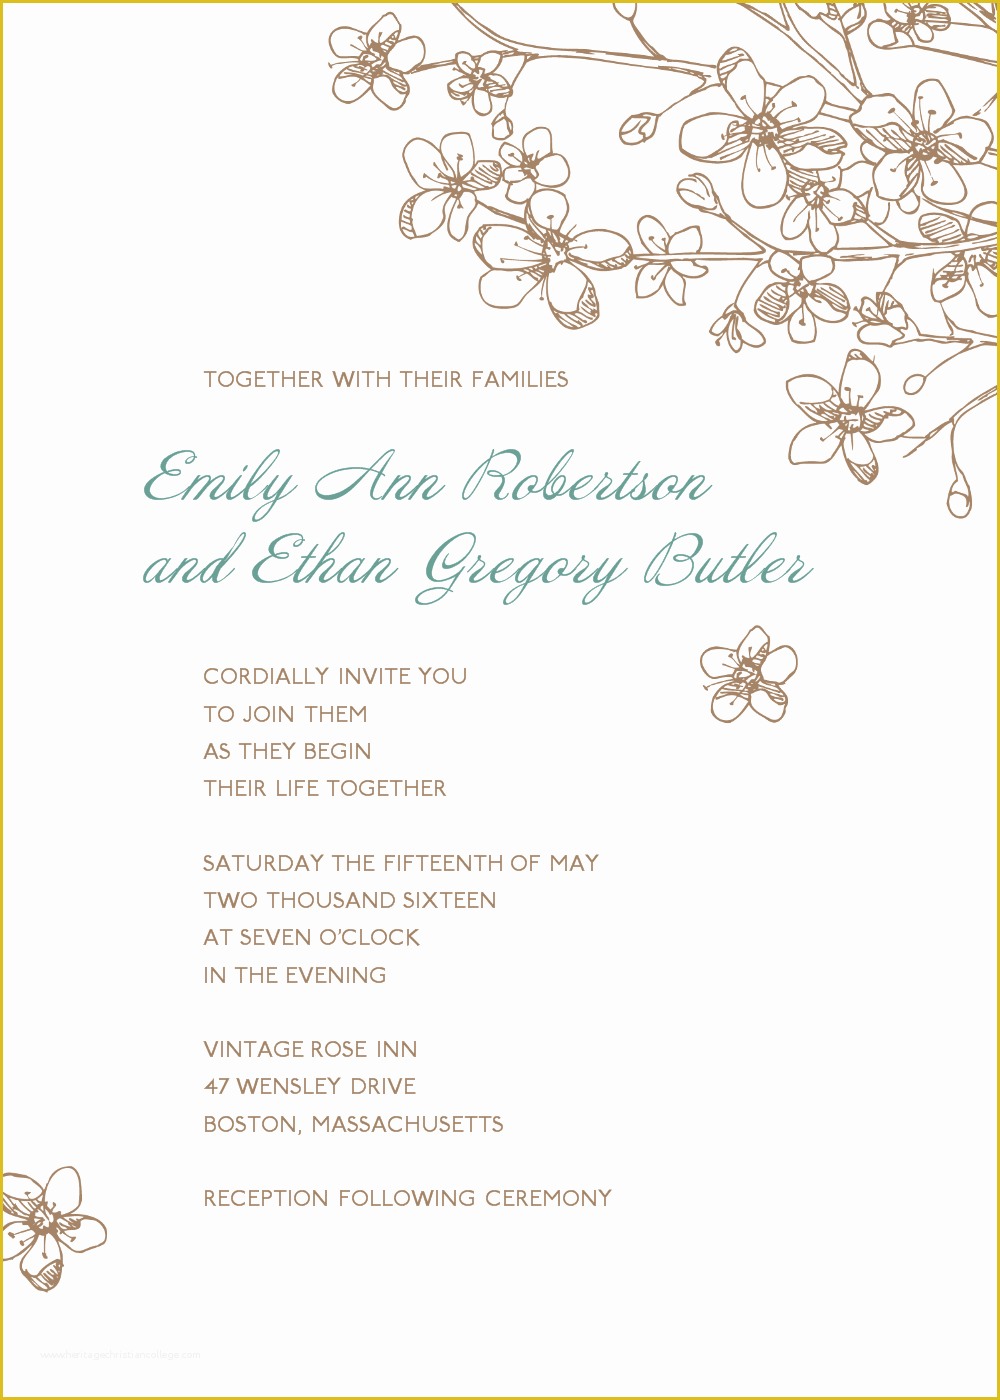 Free Email Wedding Invitation Templates Of Nice Wedding Invitation Email Wedding Invitations Design